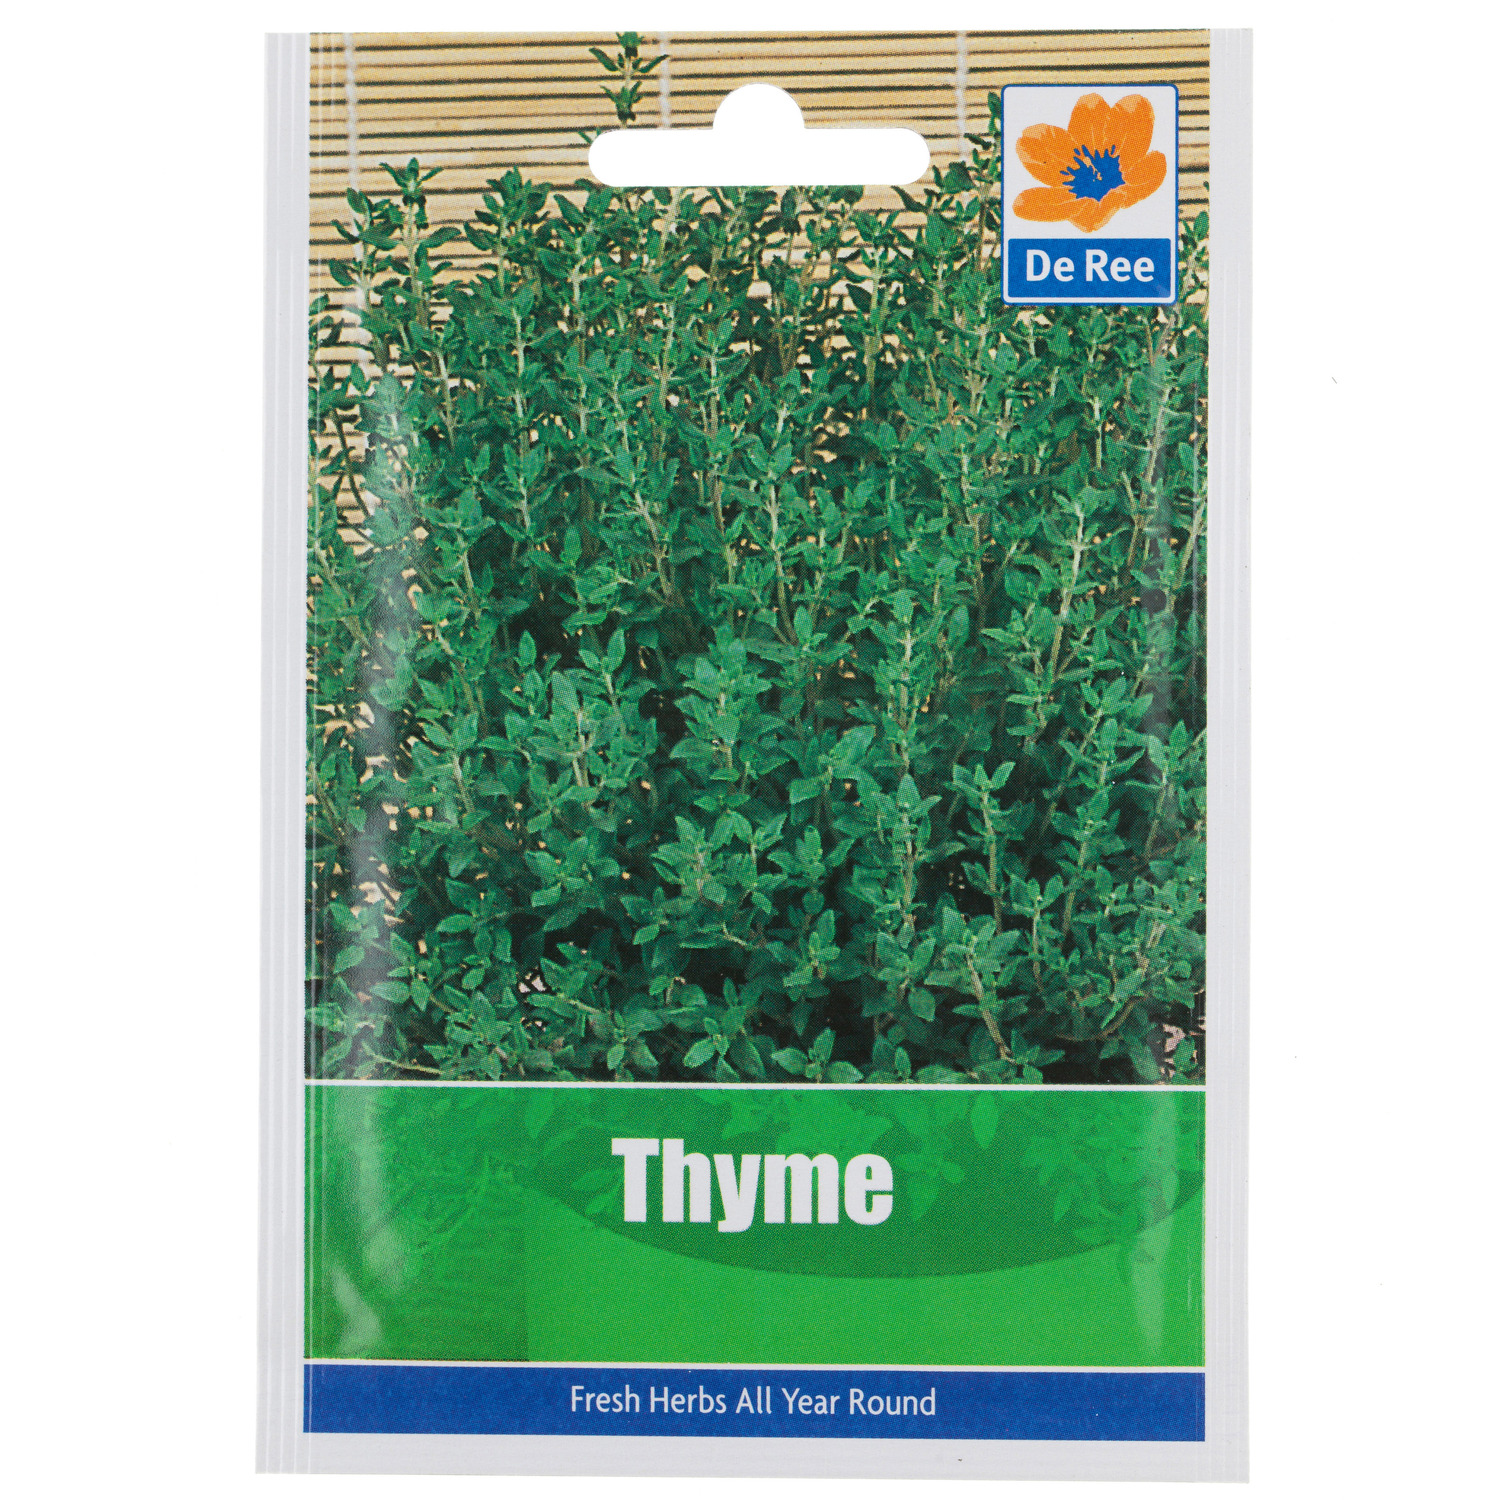 De Ree Thyme Seed Packet Image